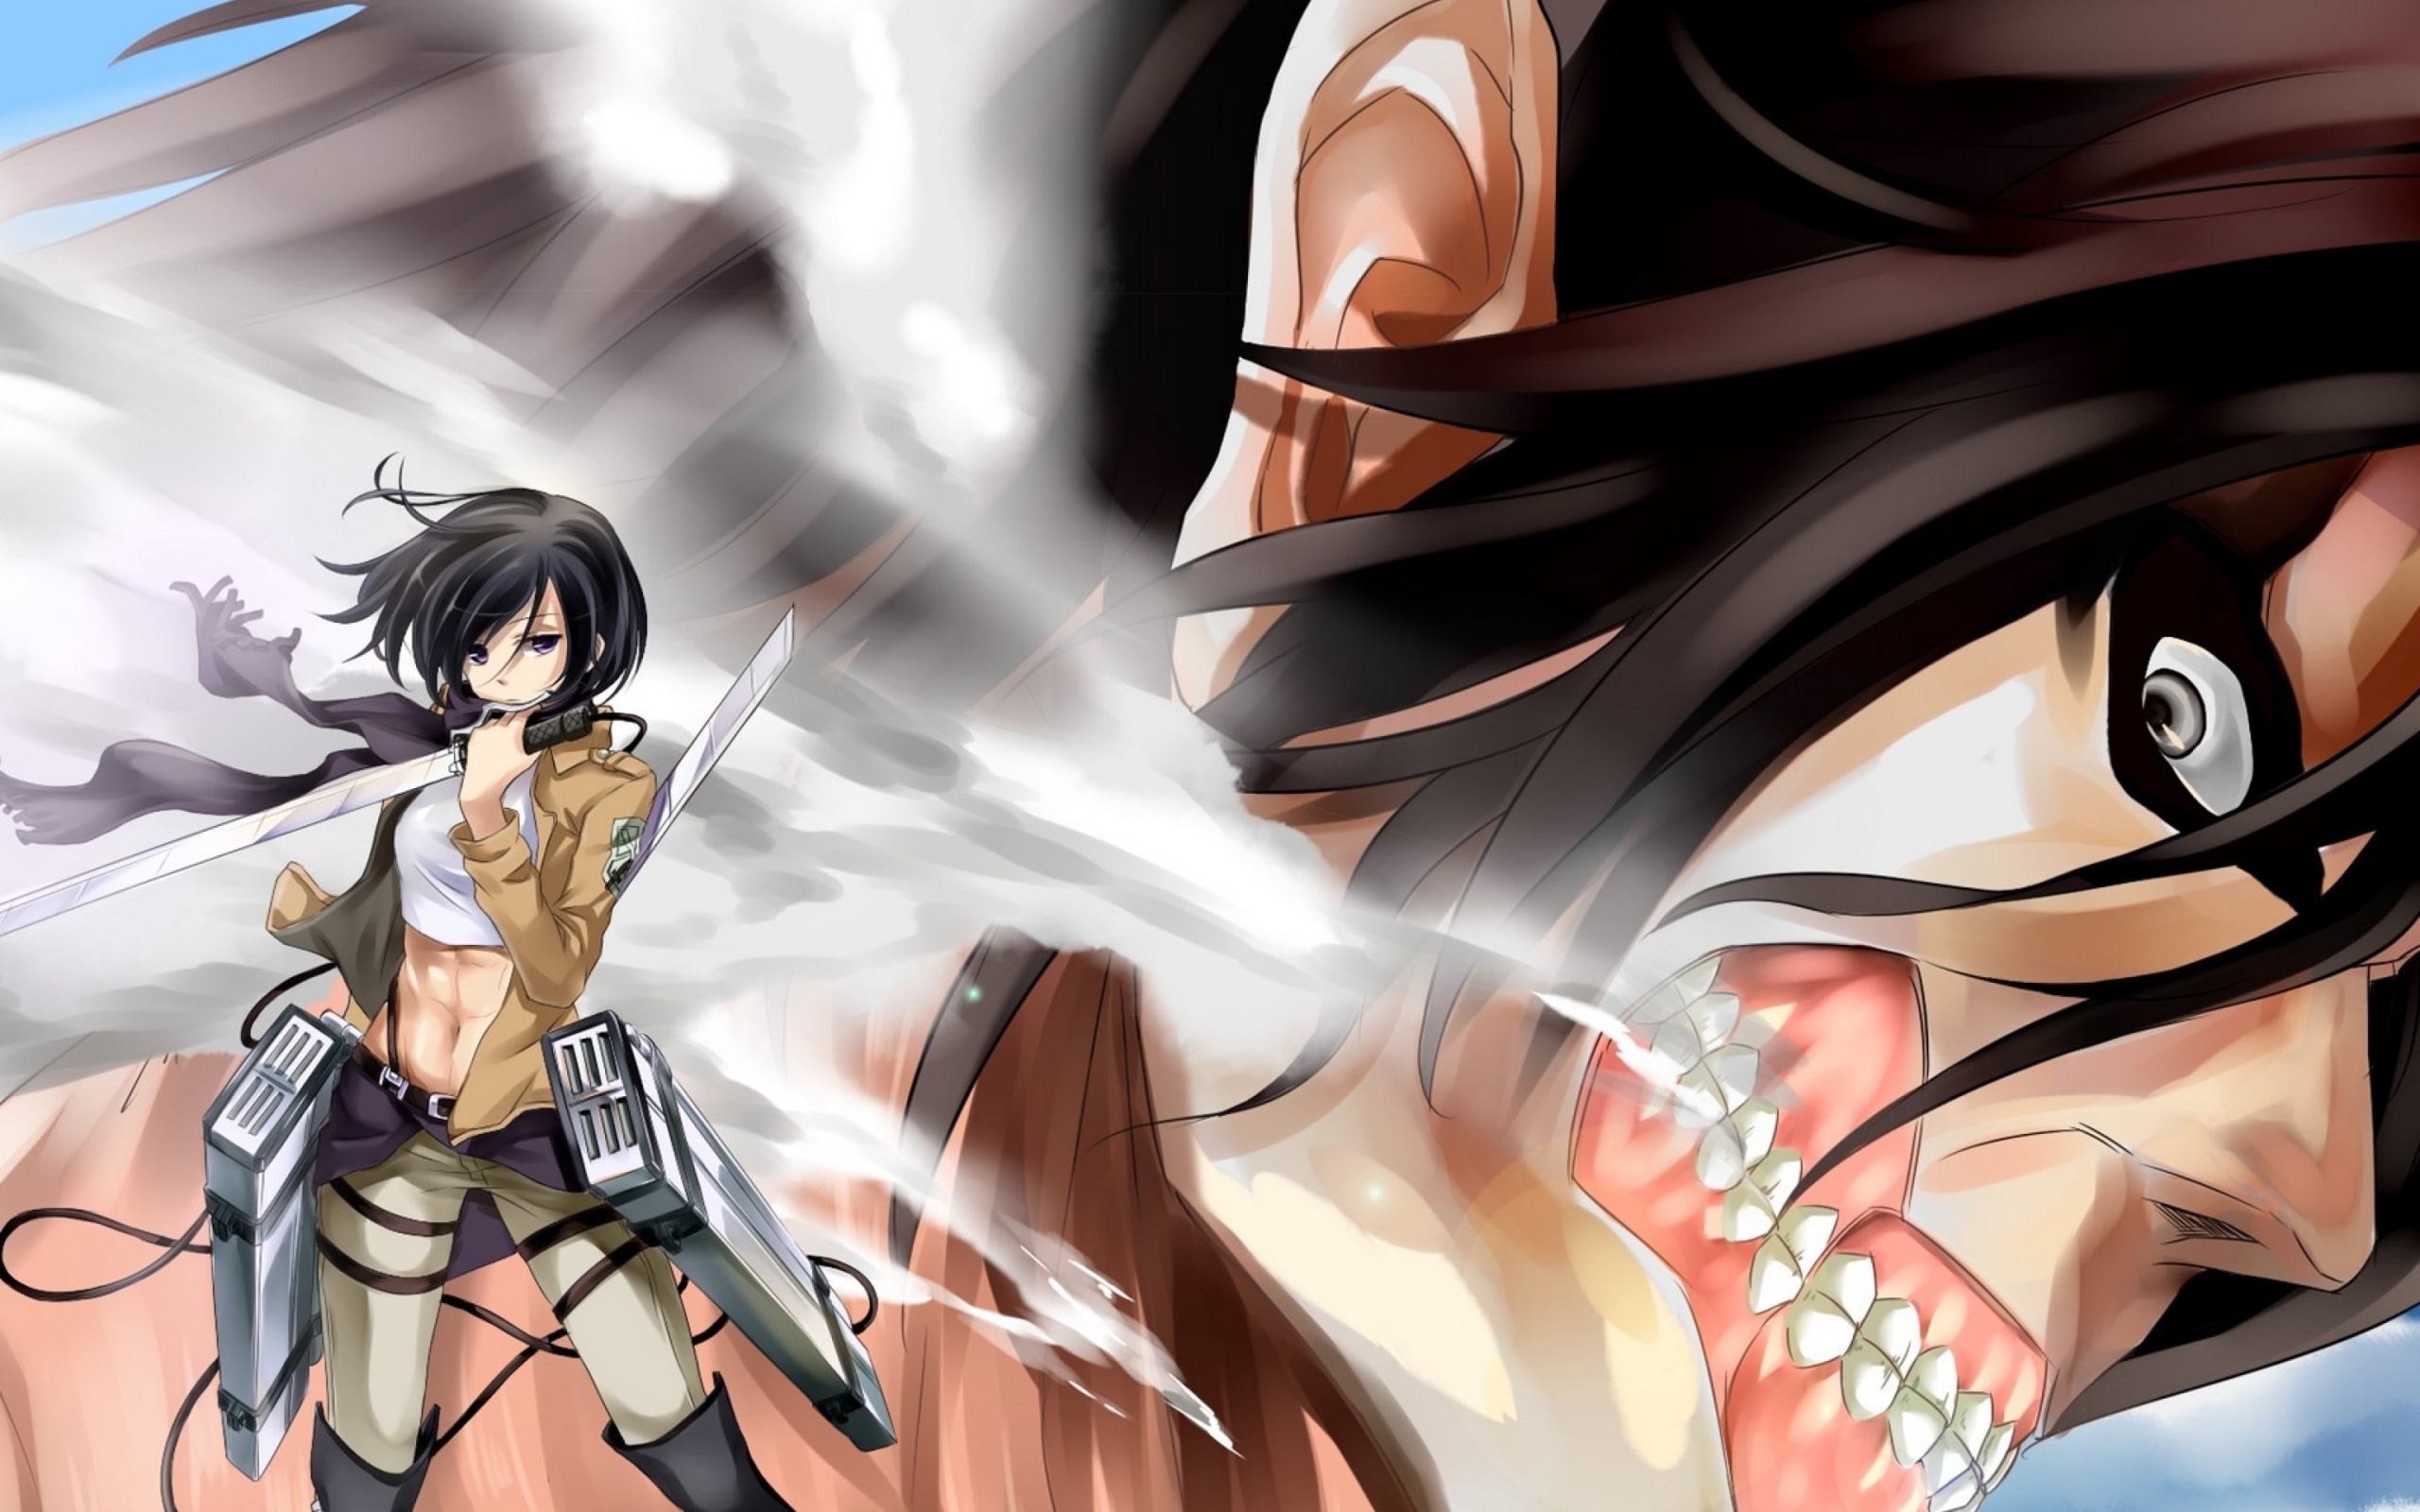 Attack on Titan with Eren and Mikasa wallpaper 2560x1600